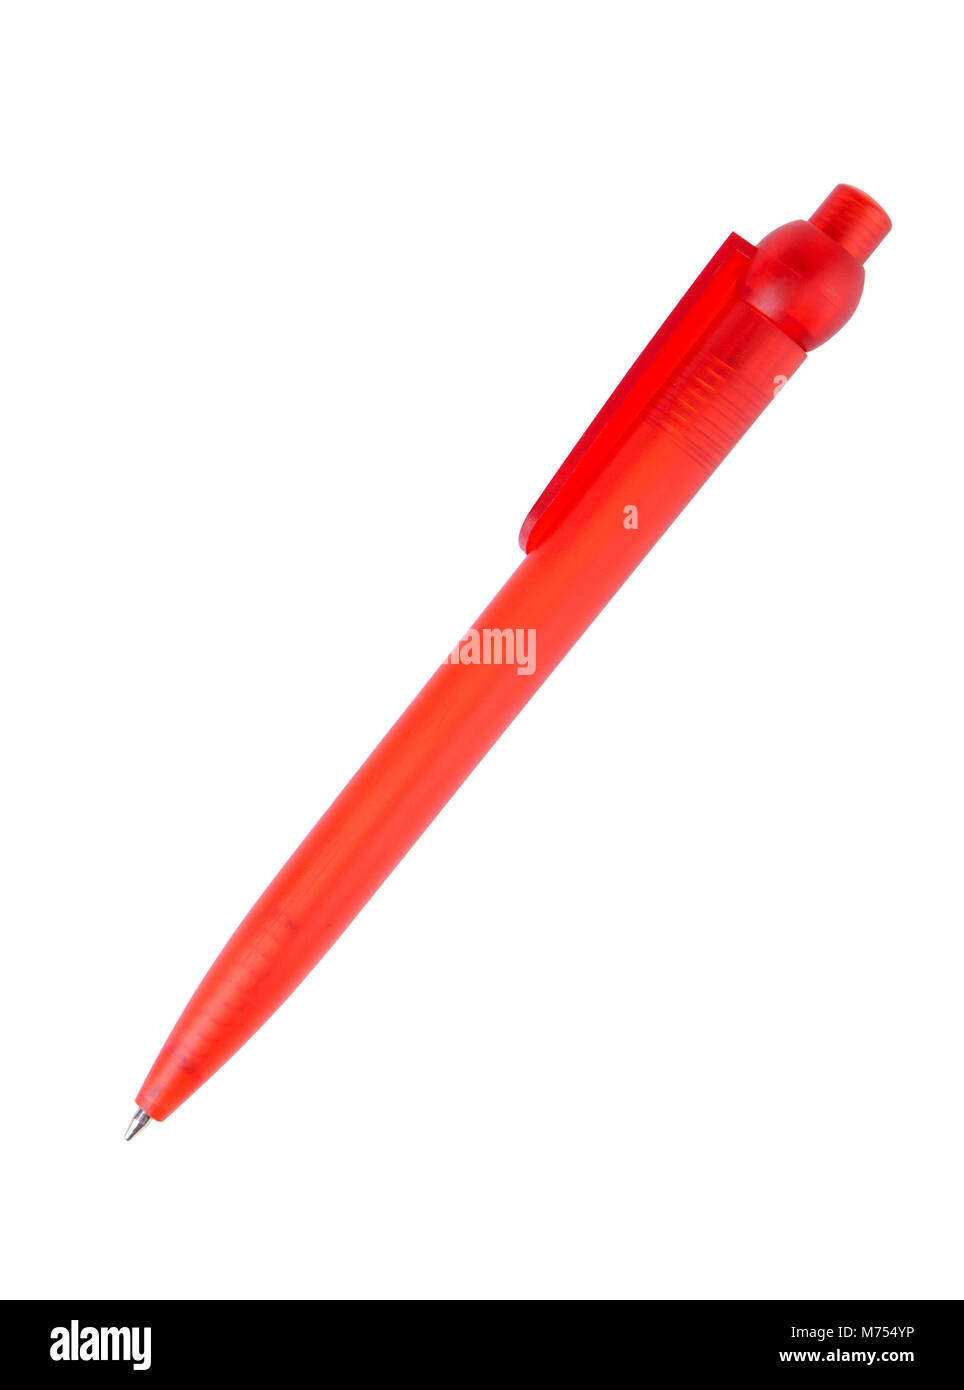 Red plastic ball point pen isolated on white Stock Photo